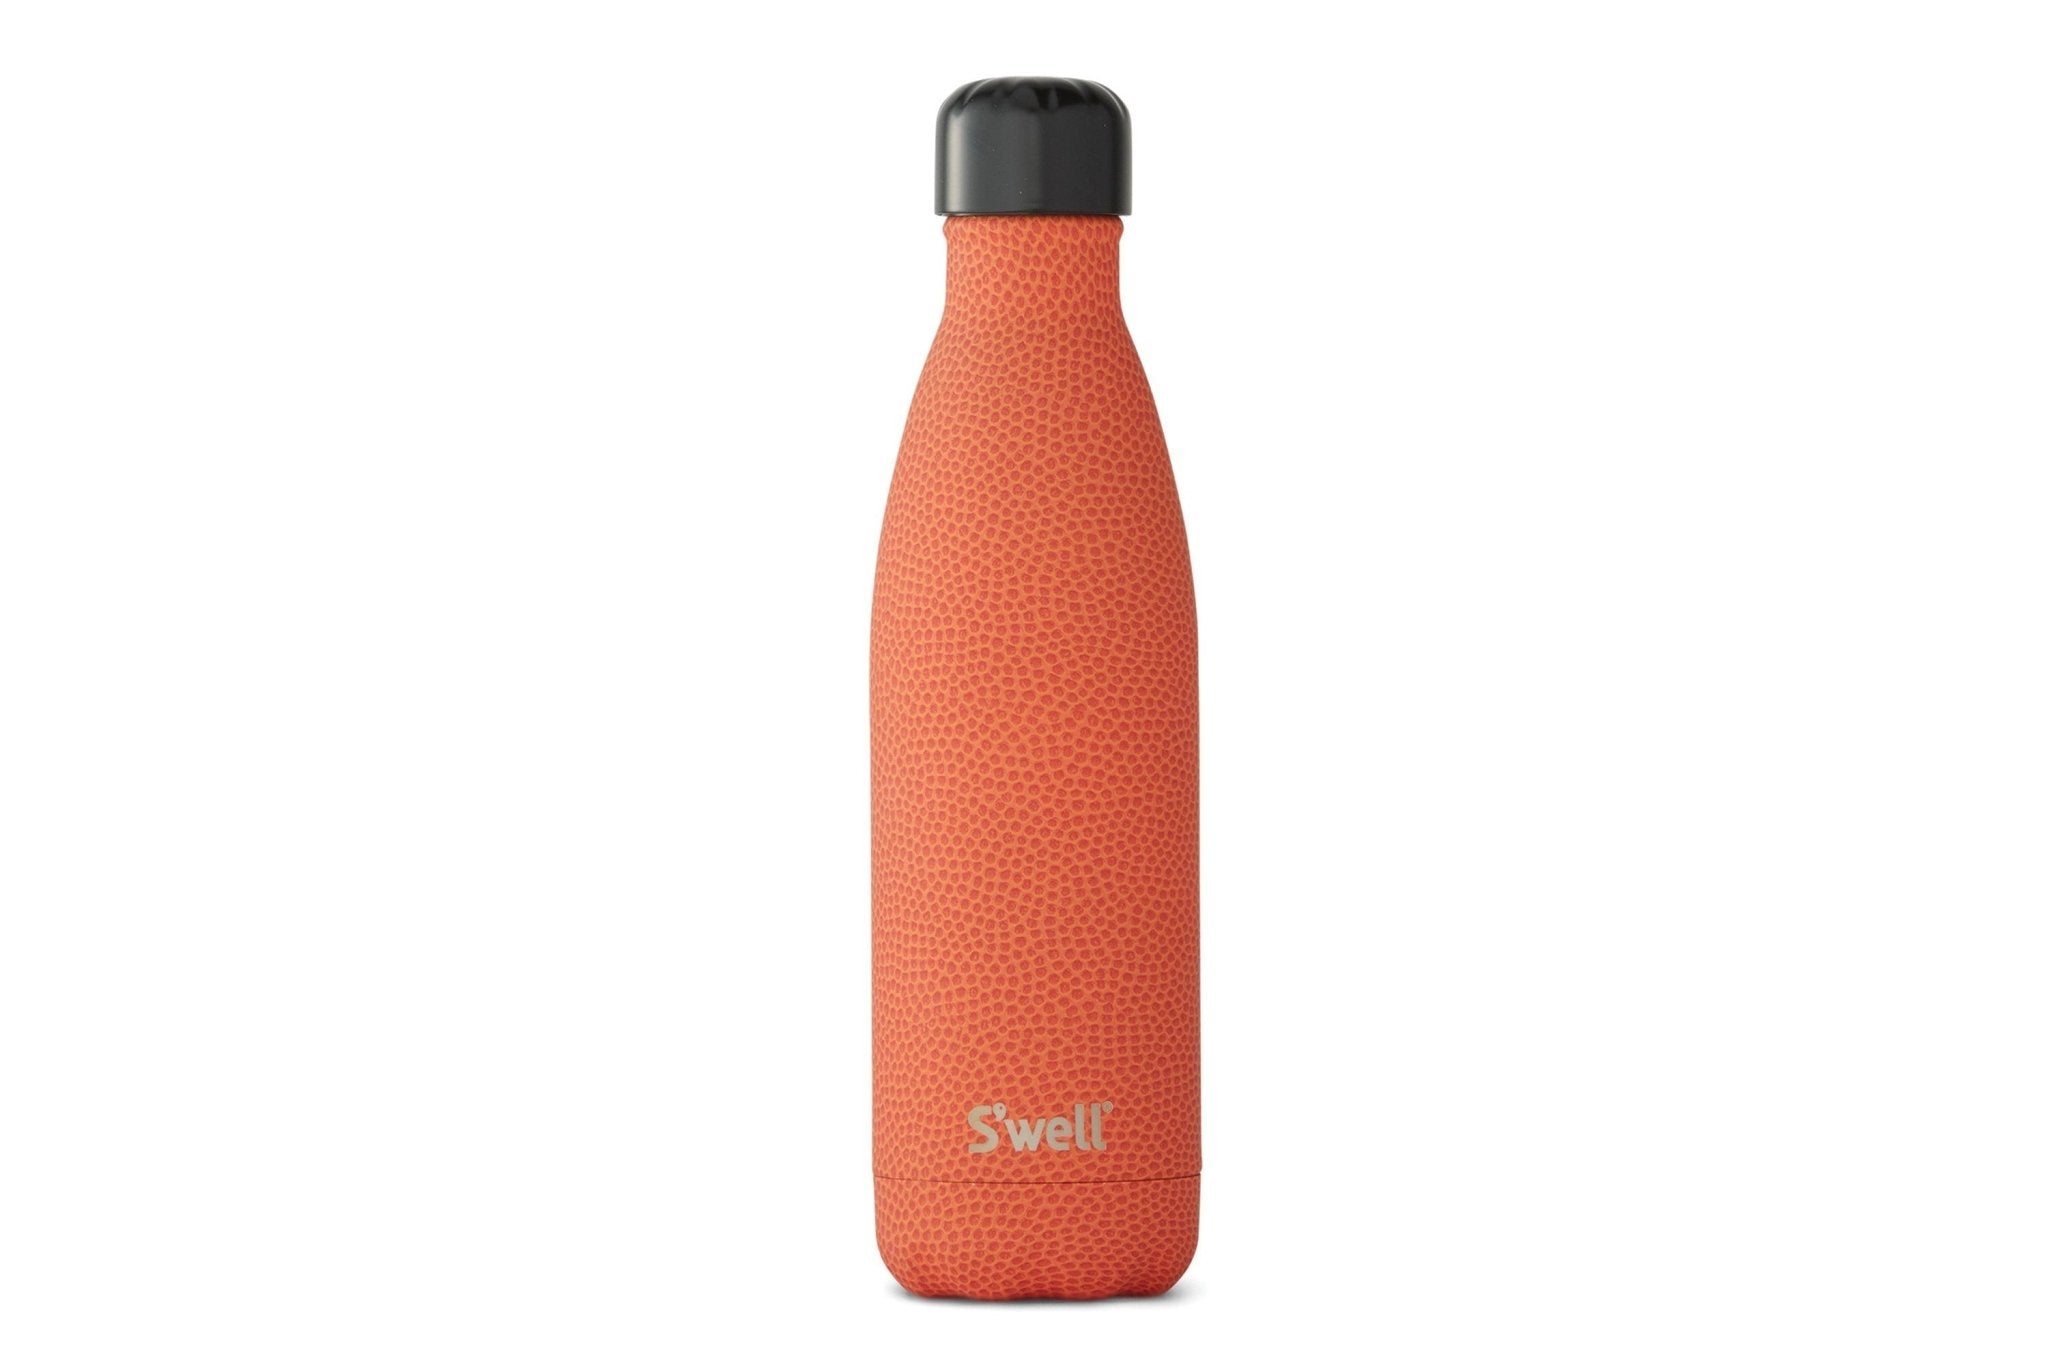 S'well Stainless Steel Water Bottle - Basketball 17 oz